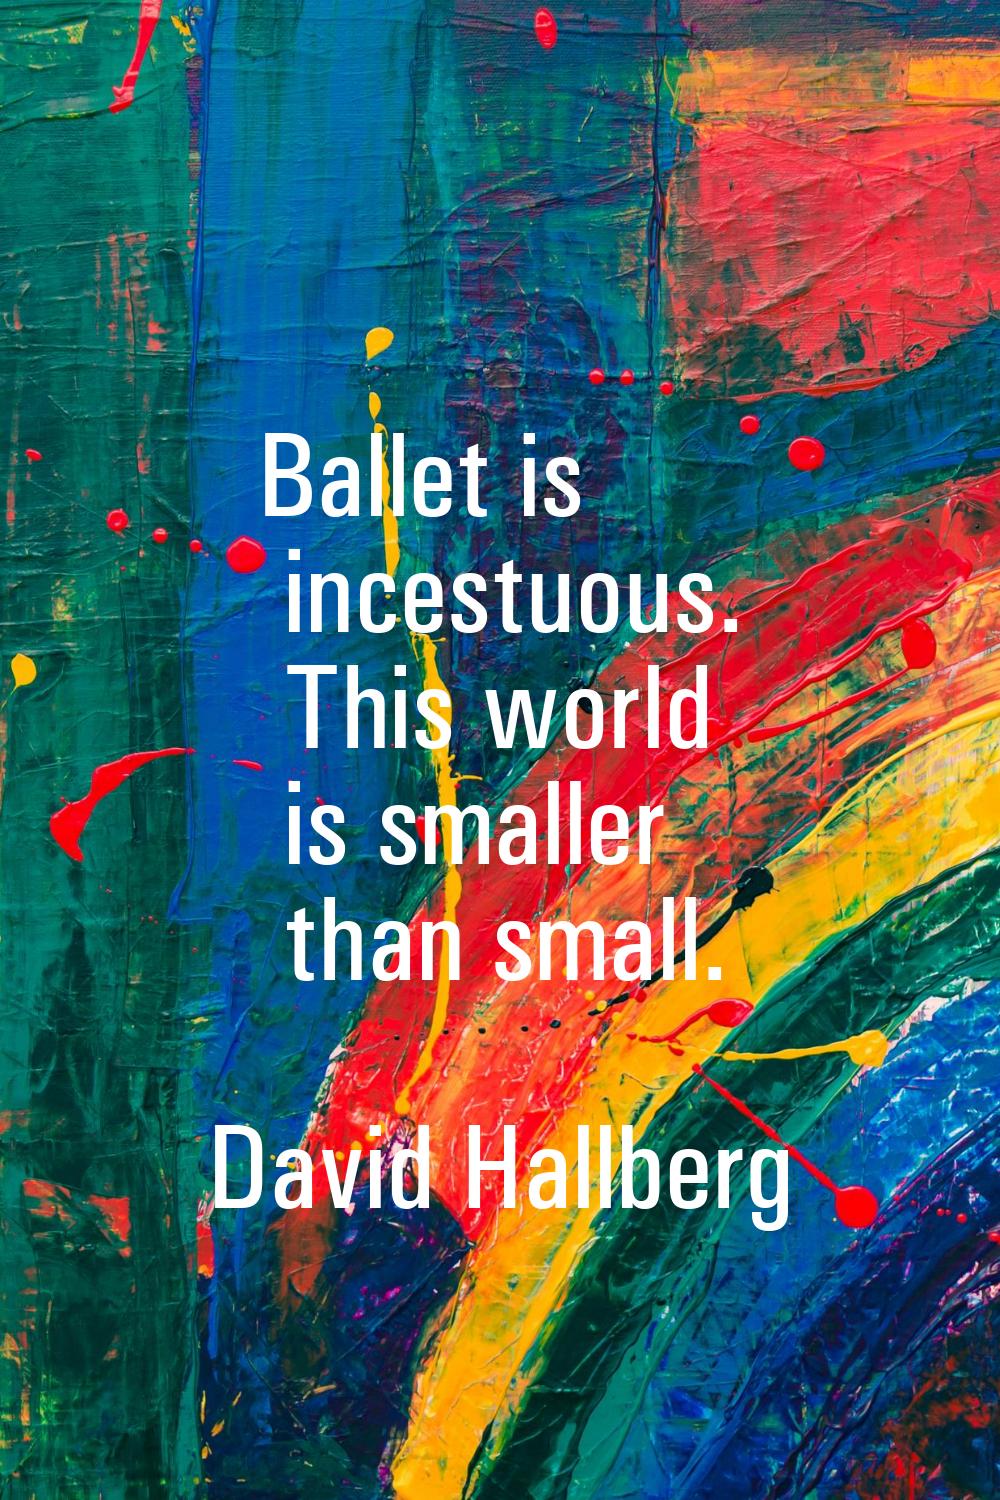 Ballet is incestuous. This world is smaller than small.